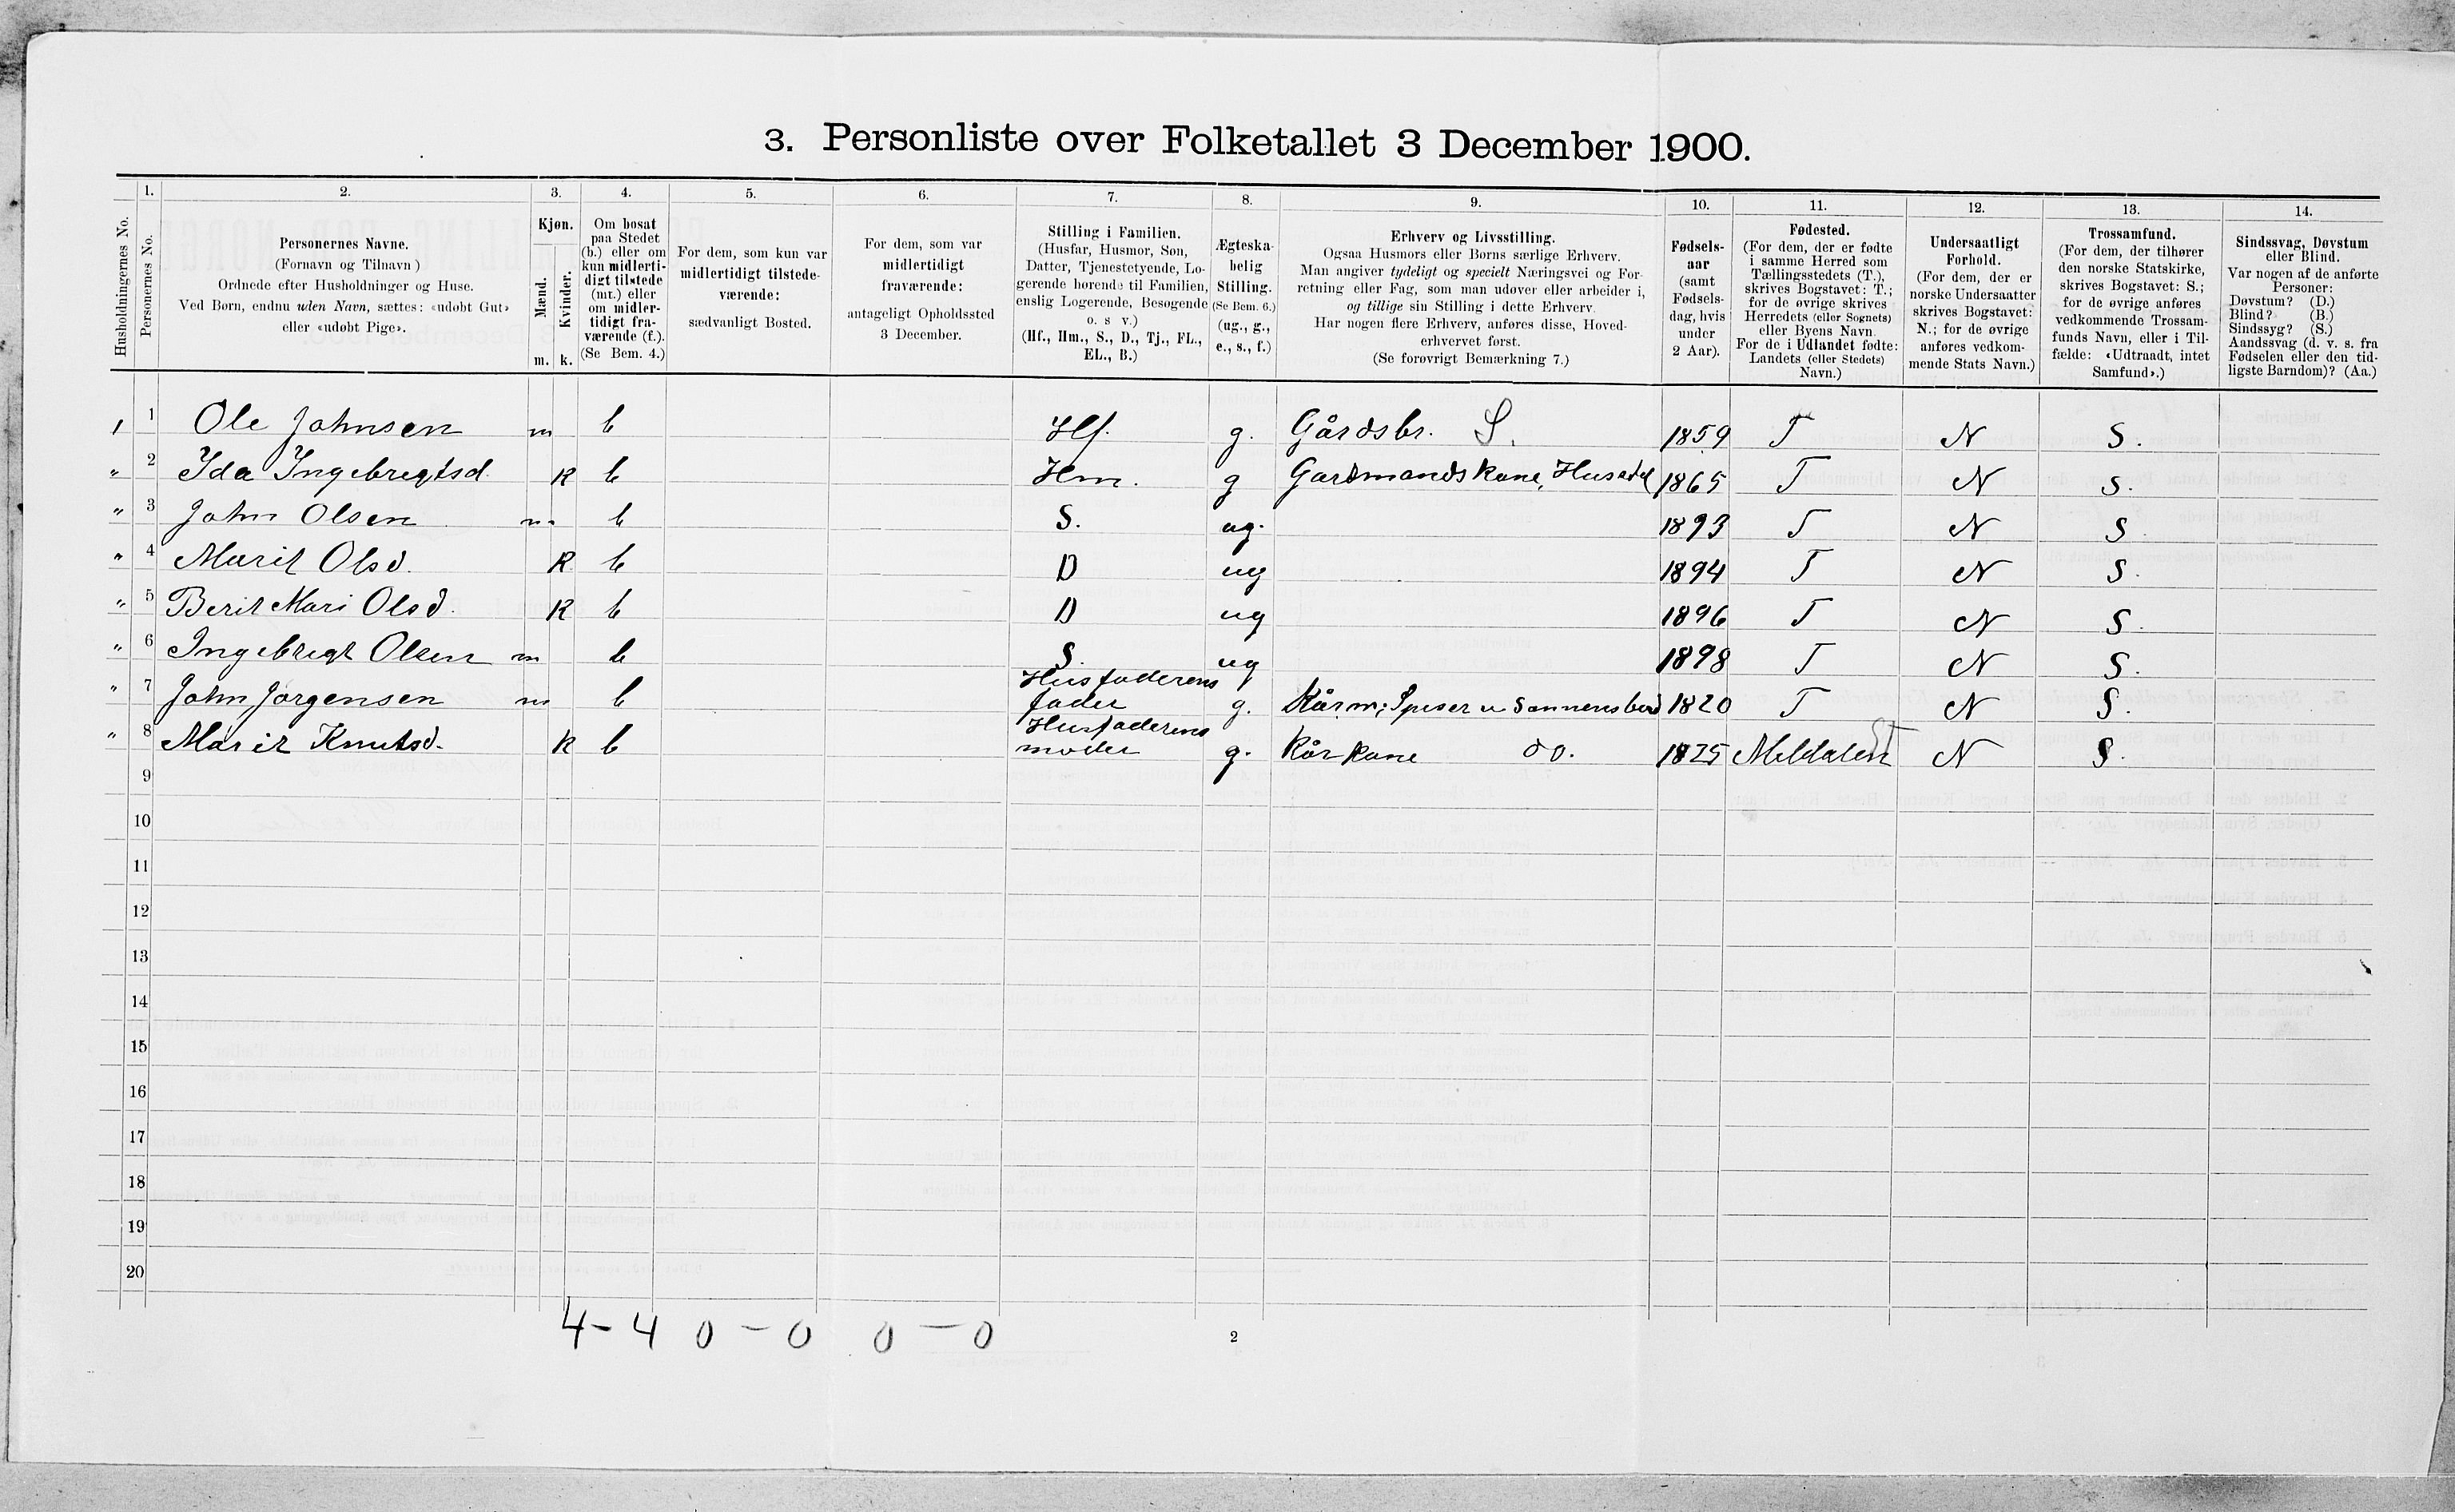 SAT, 1900 census for Orkdal, 1900, p. 1314